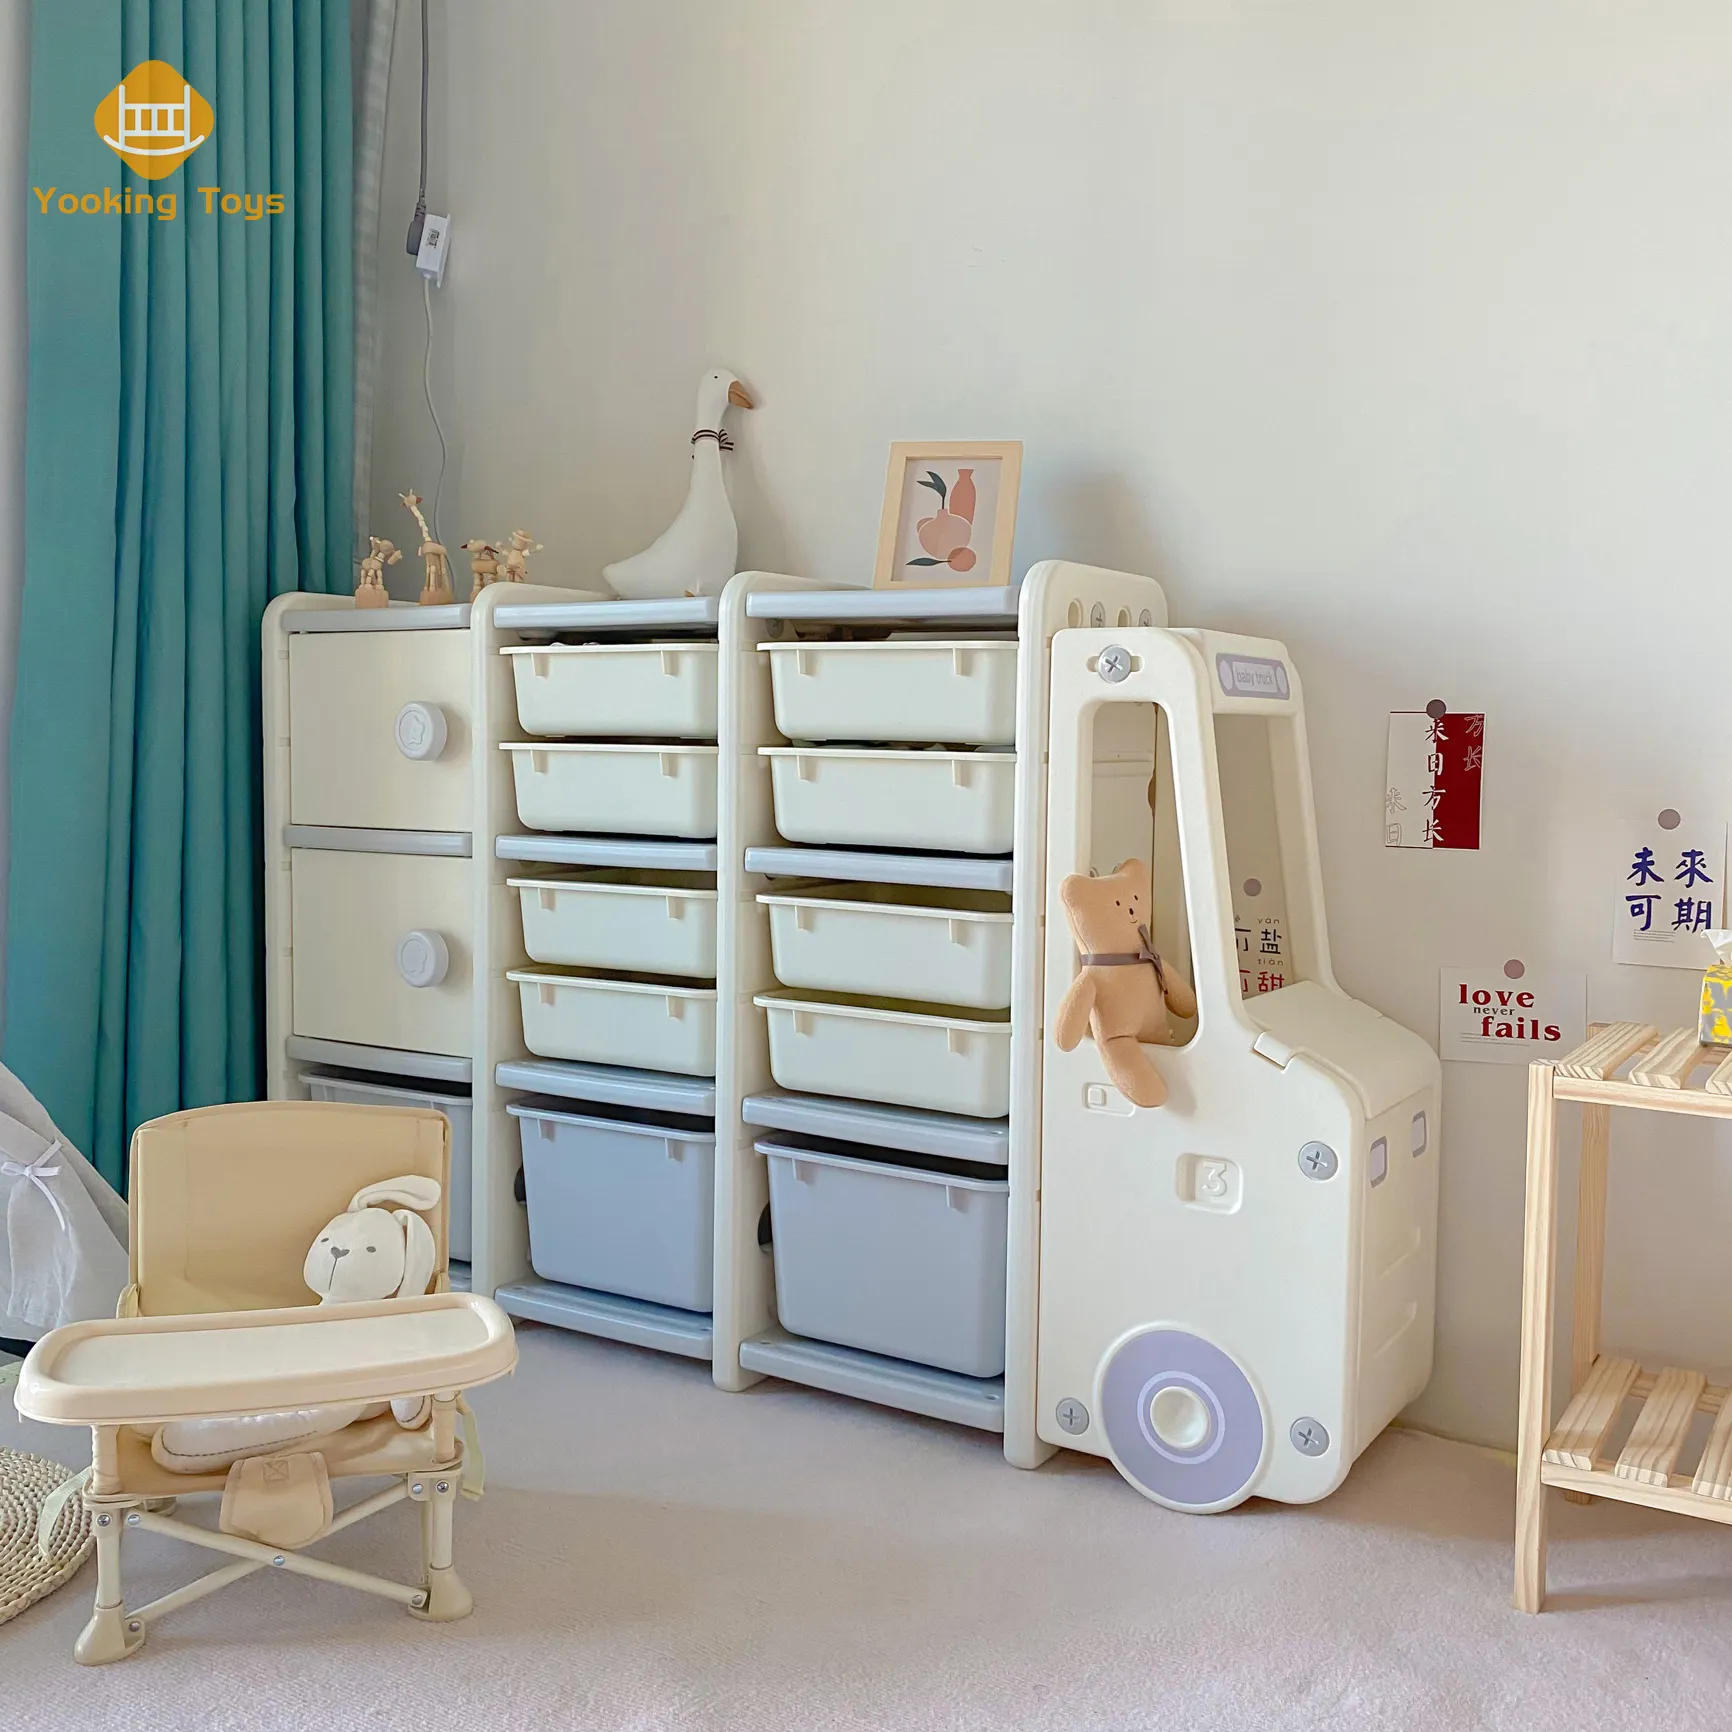 Kids Toy Storage China Trade,Buy China Direct From Kids Toy Storage  Factories at Alibaba.com